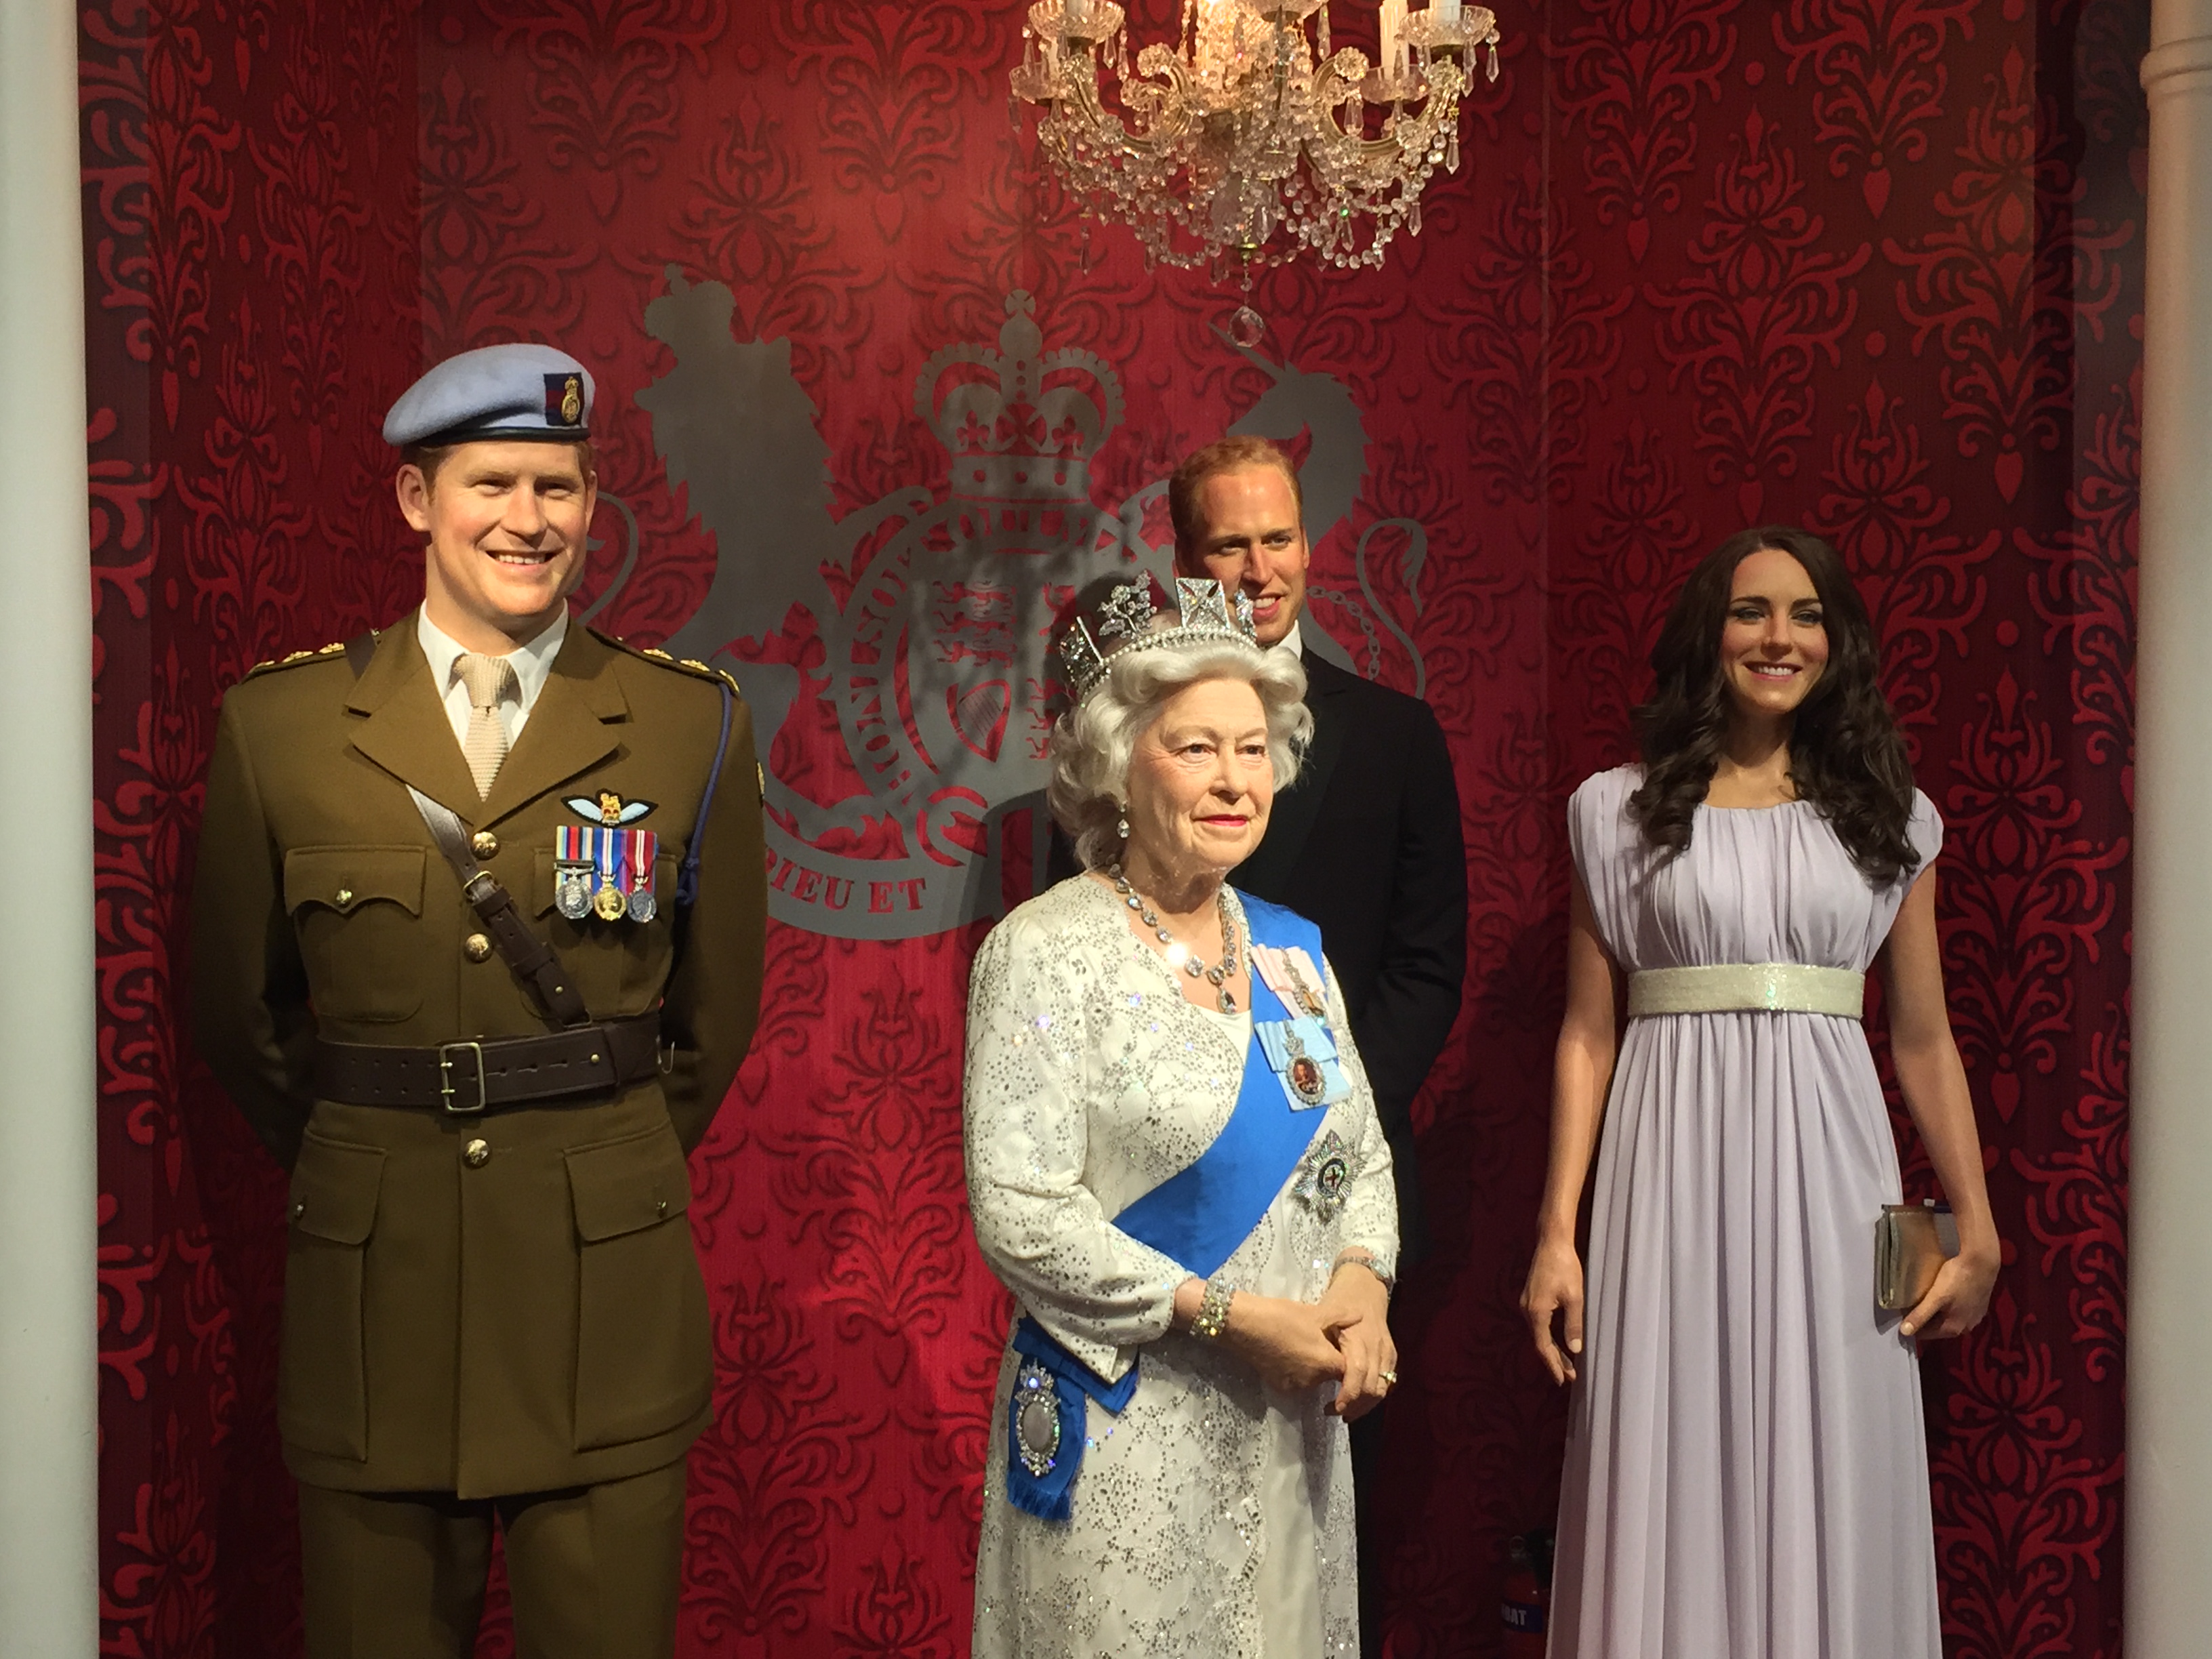 Prince Harry, Queen Elizabeth II, and the Duke and Duchess of Cambridge